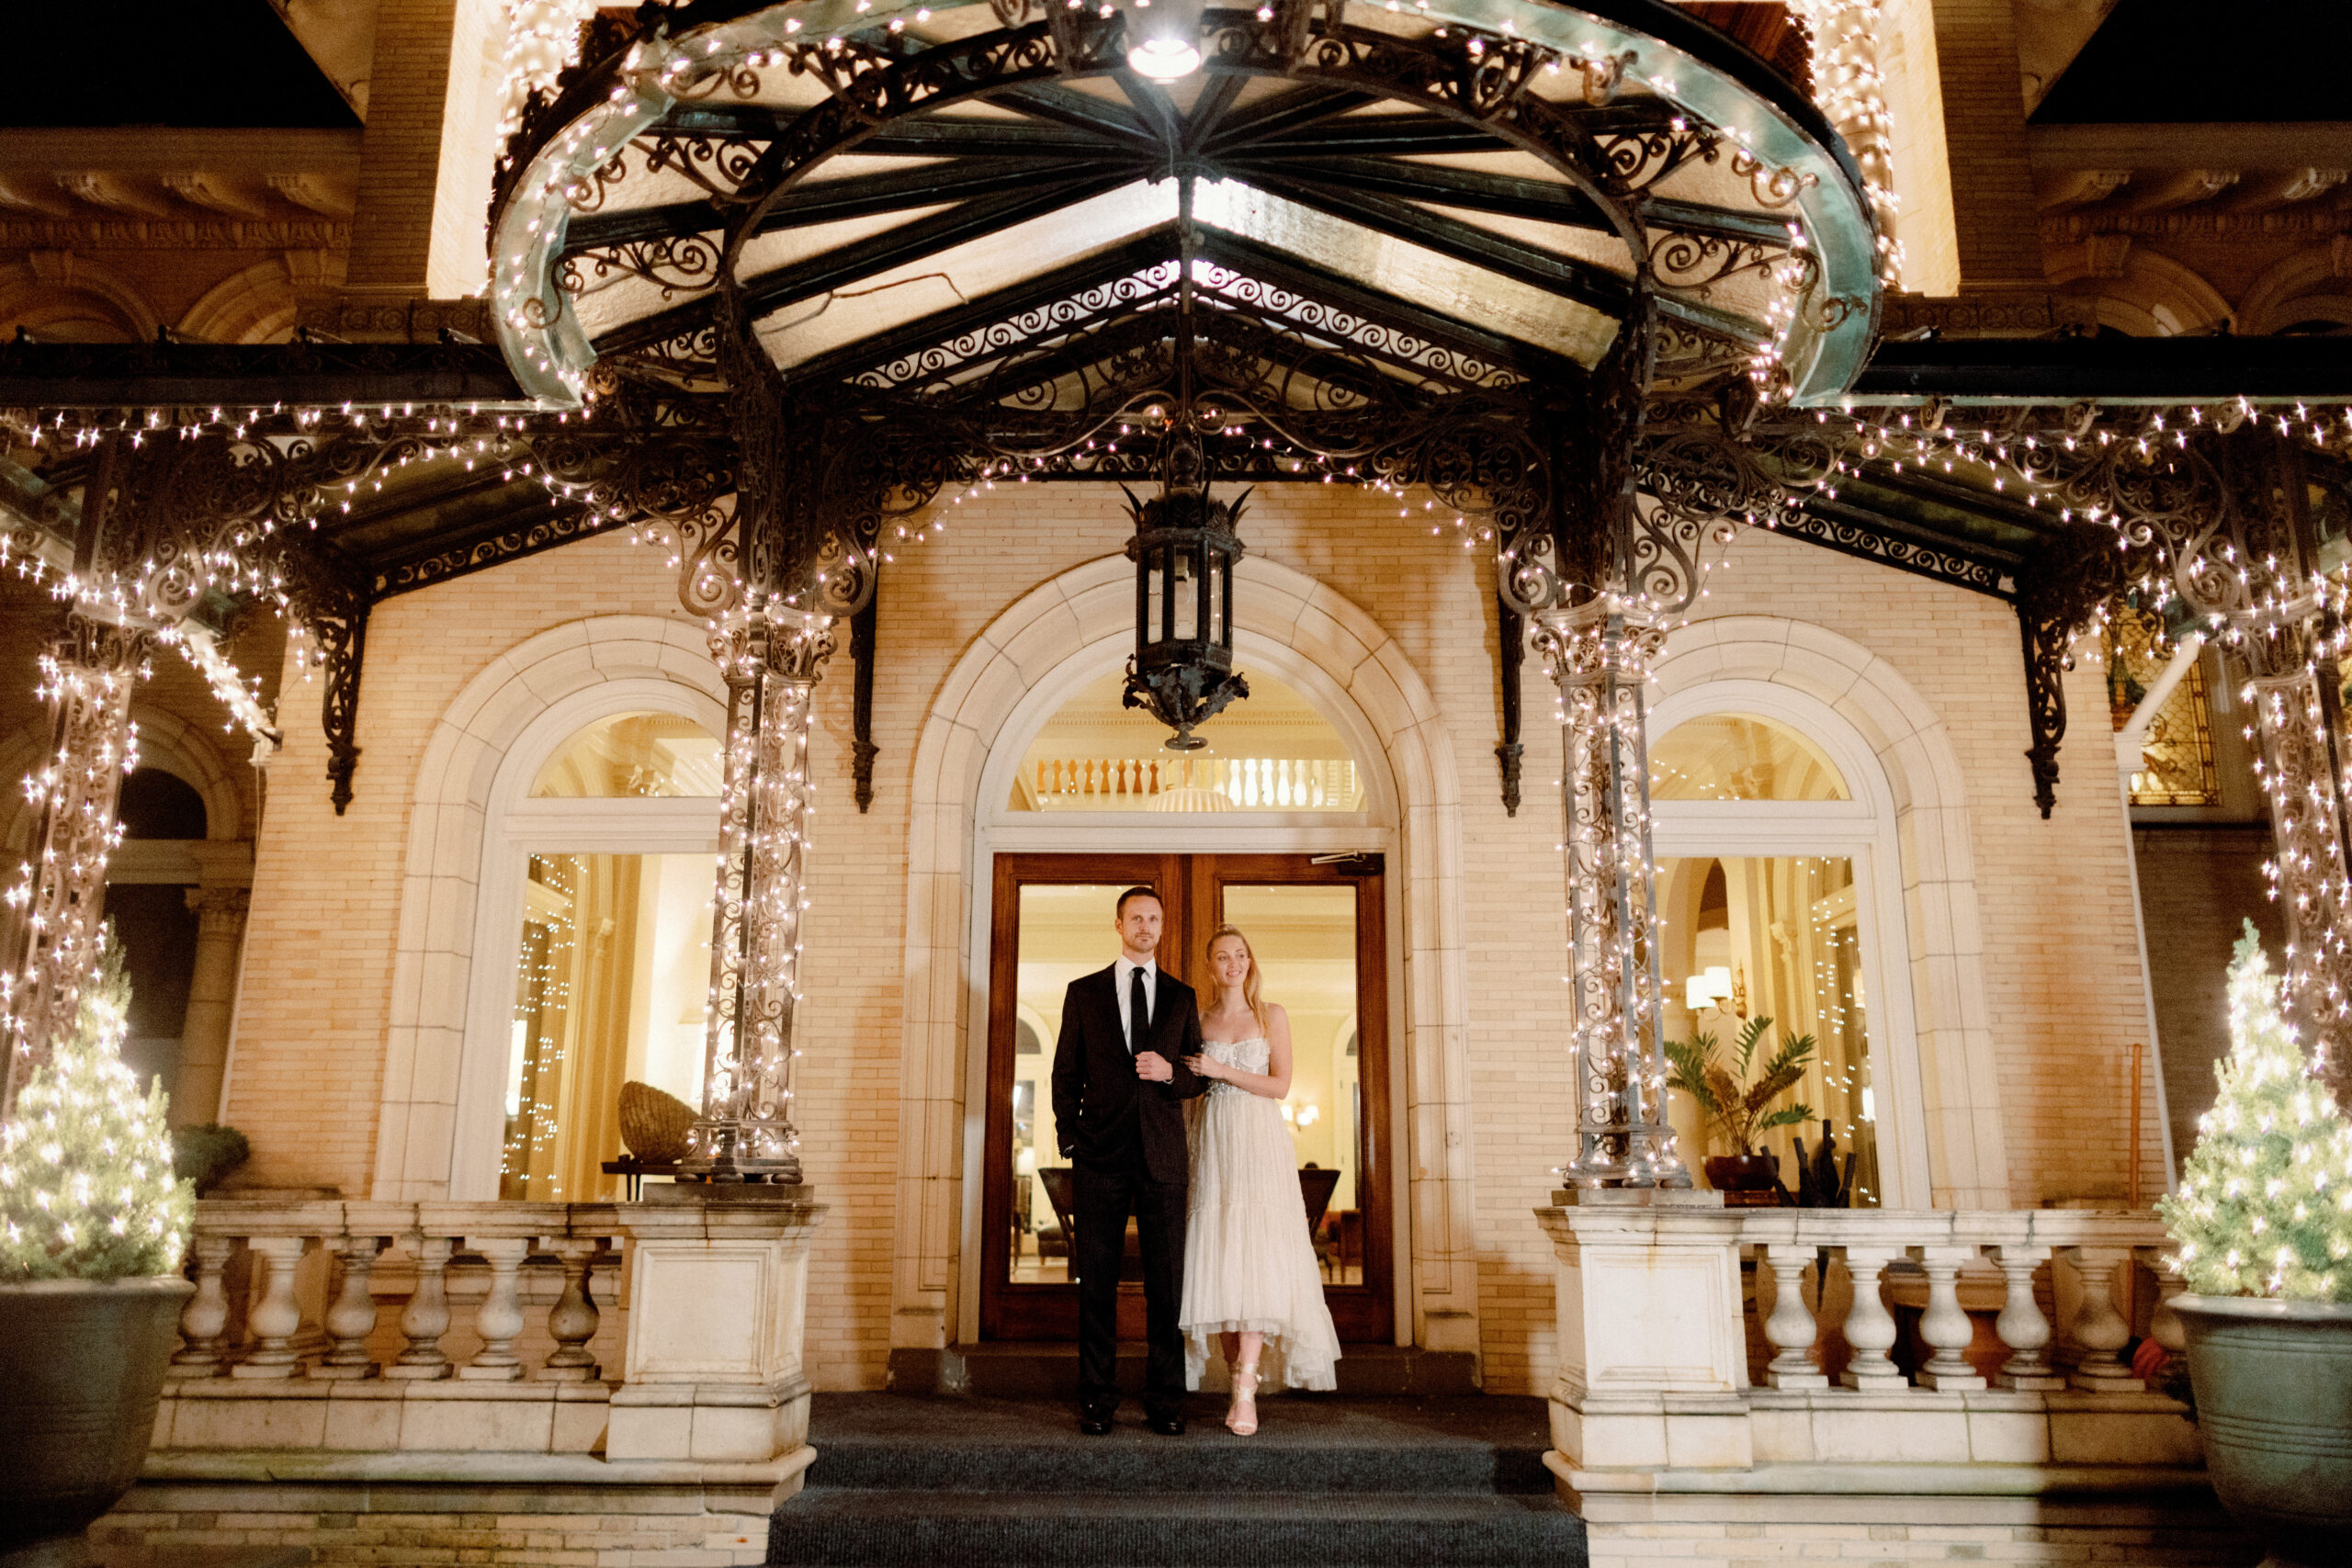 The couple is standing in front of the luxury wedding venue. Luxury wedding trends of 2023 image by Jenny Fu Studio